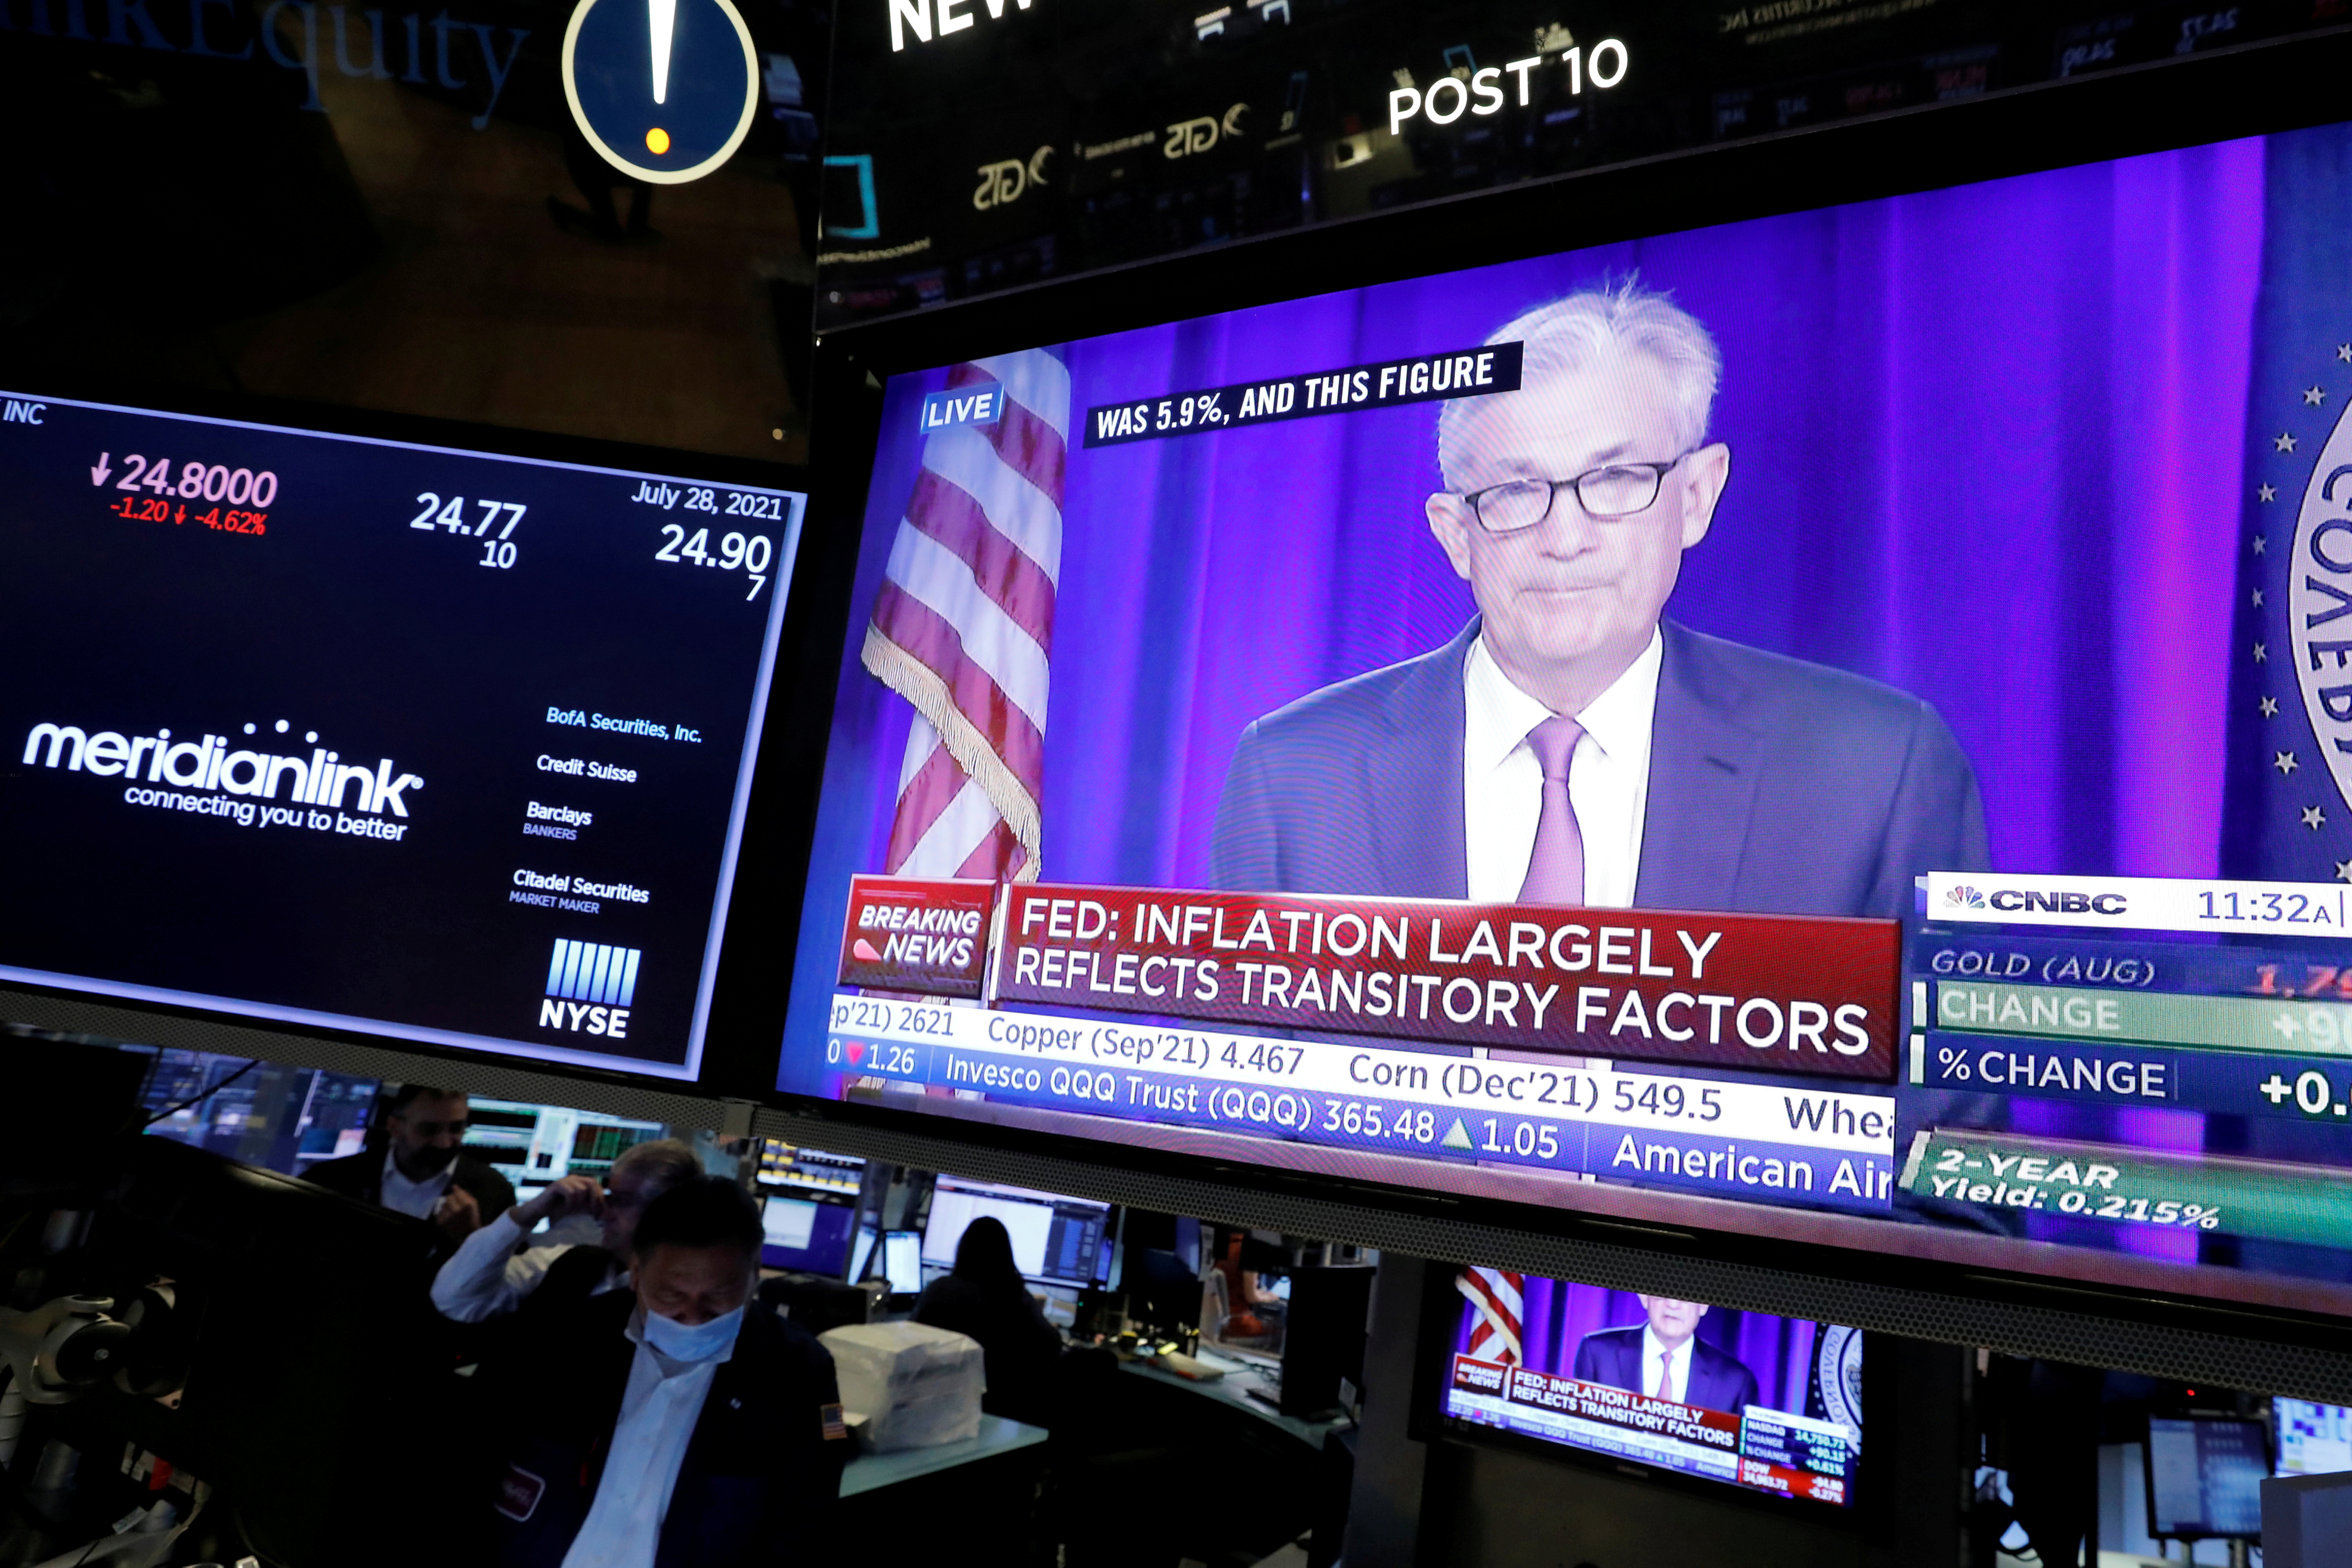 A screen displays a statement by Federal Reserve Chair Jerome Powell following the U.S. Federal Reserve's announcement as traders work on the trading floor at New York Stock Exchange (NYSE) in New York City, U.S.